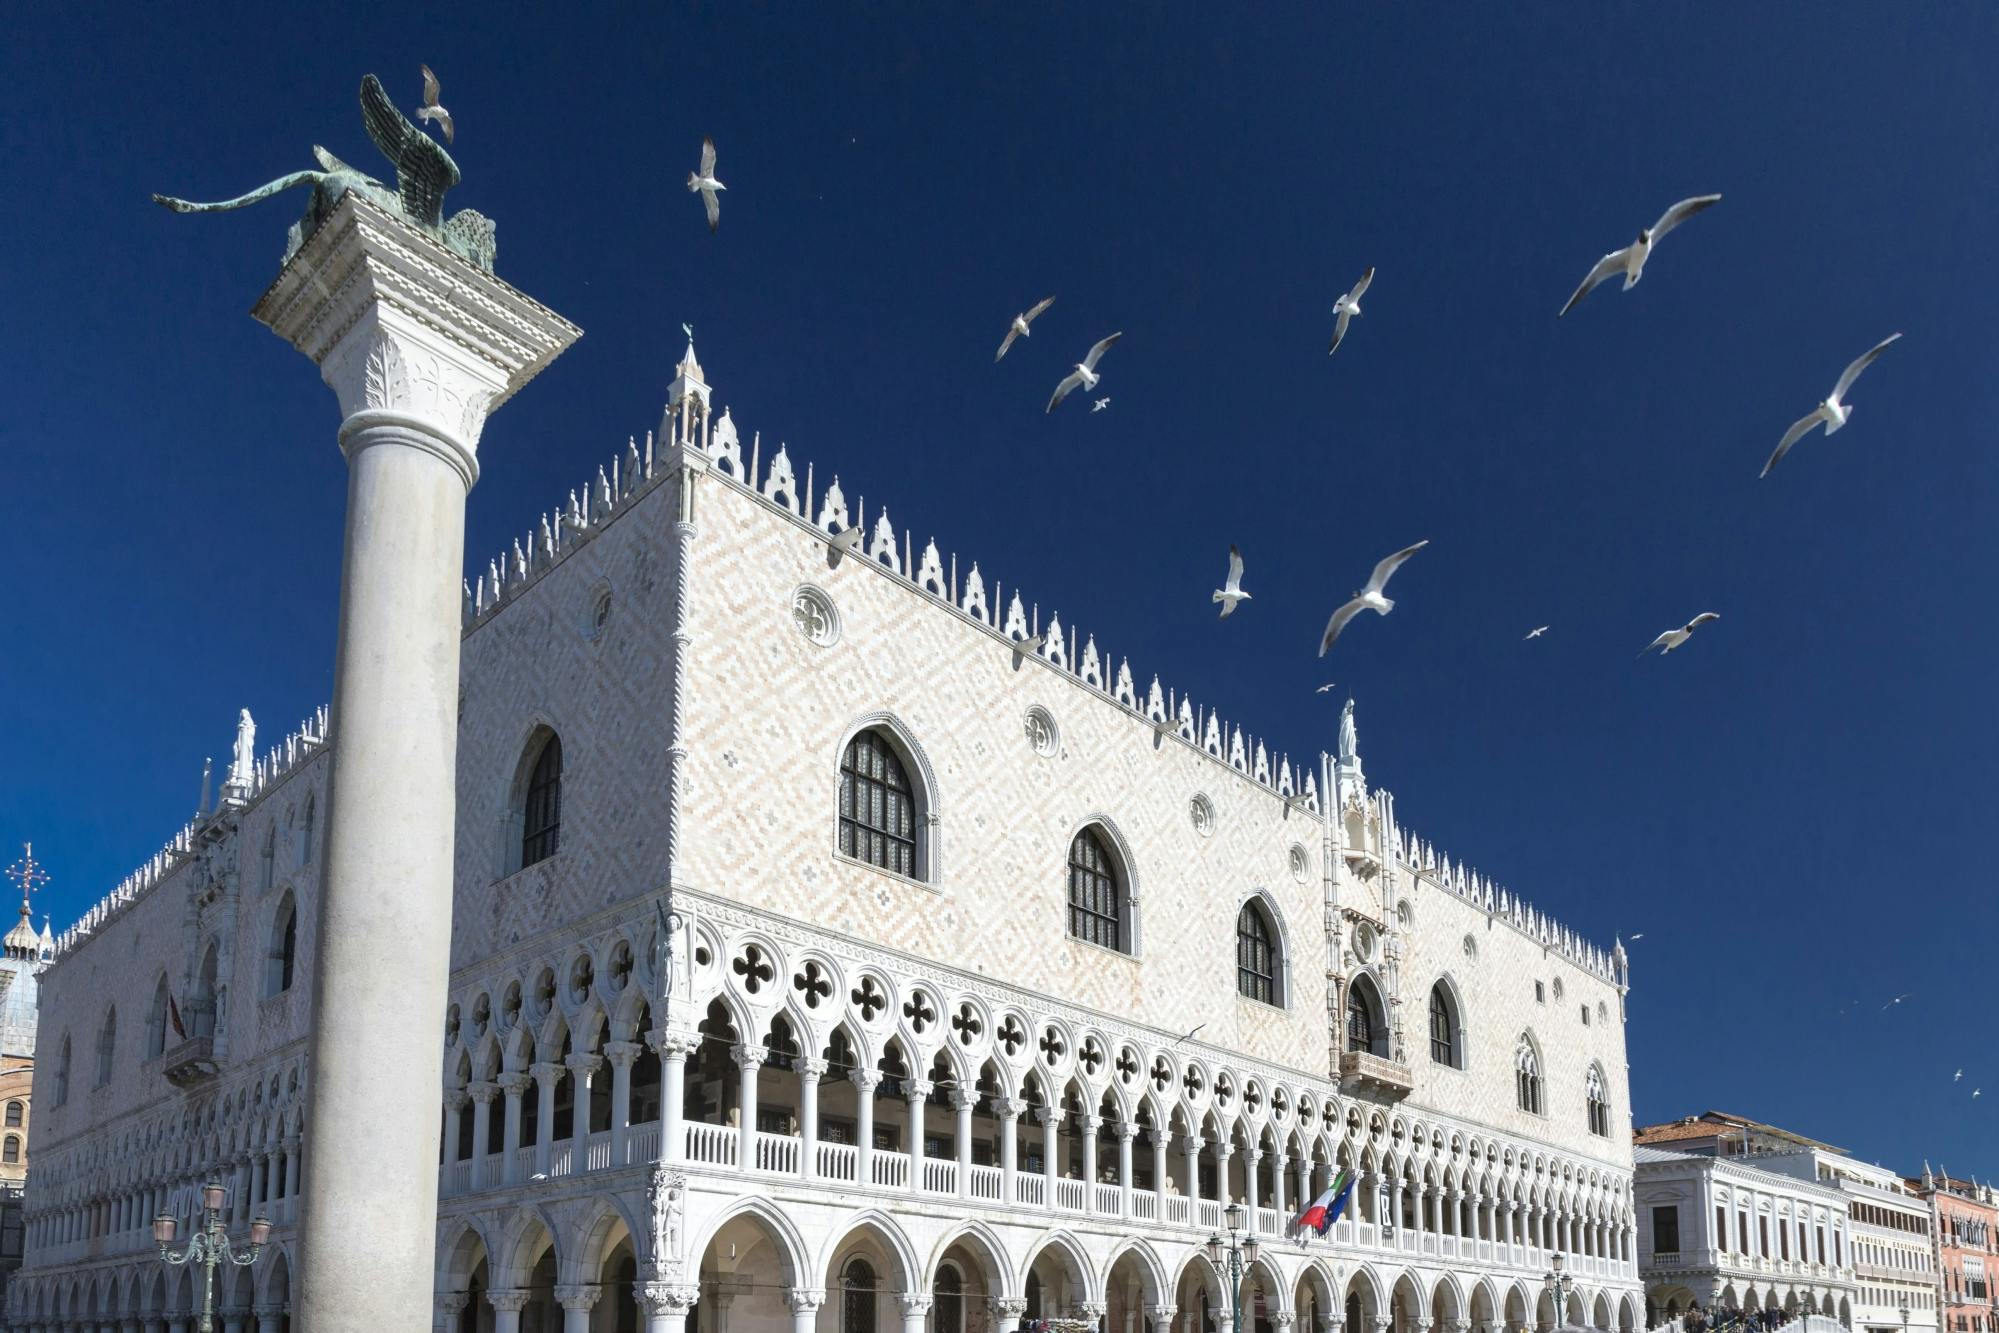 Skip-the-line entrance tickets to Doge's Palace and St Mark's Square museums